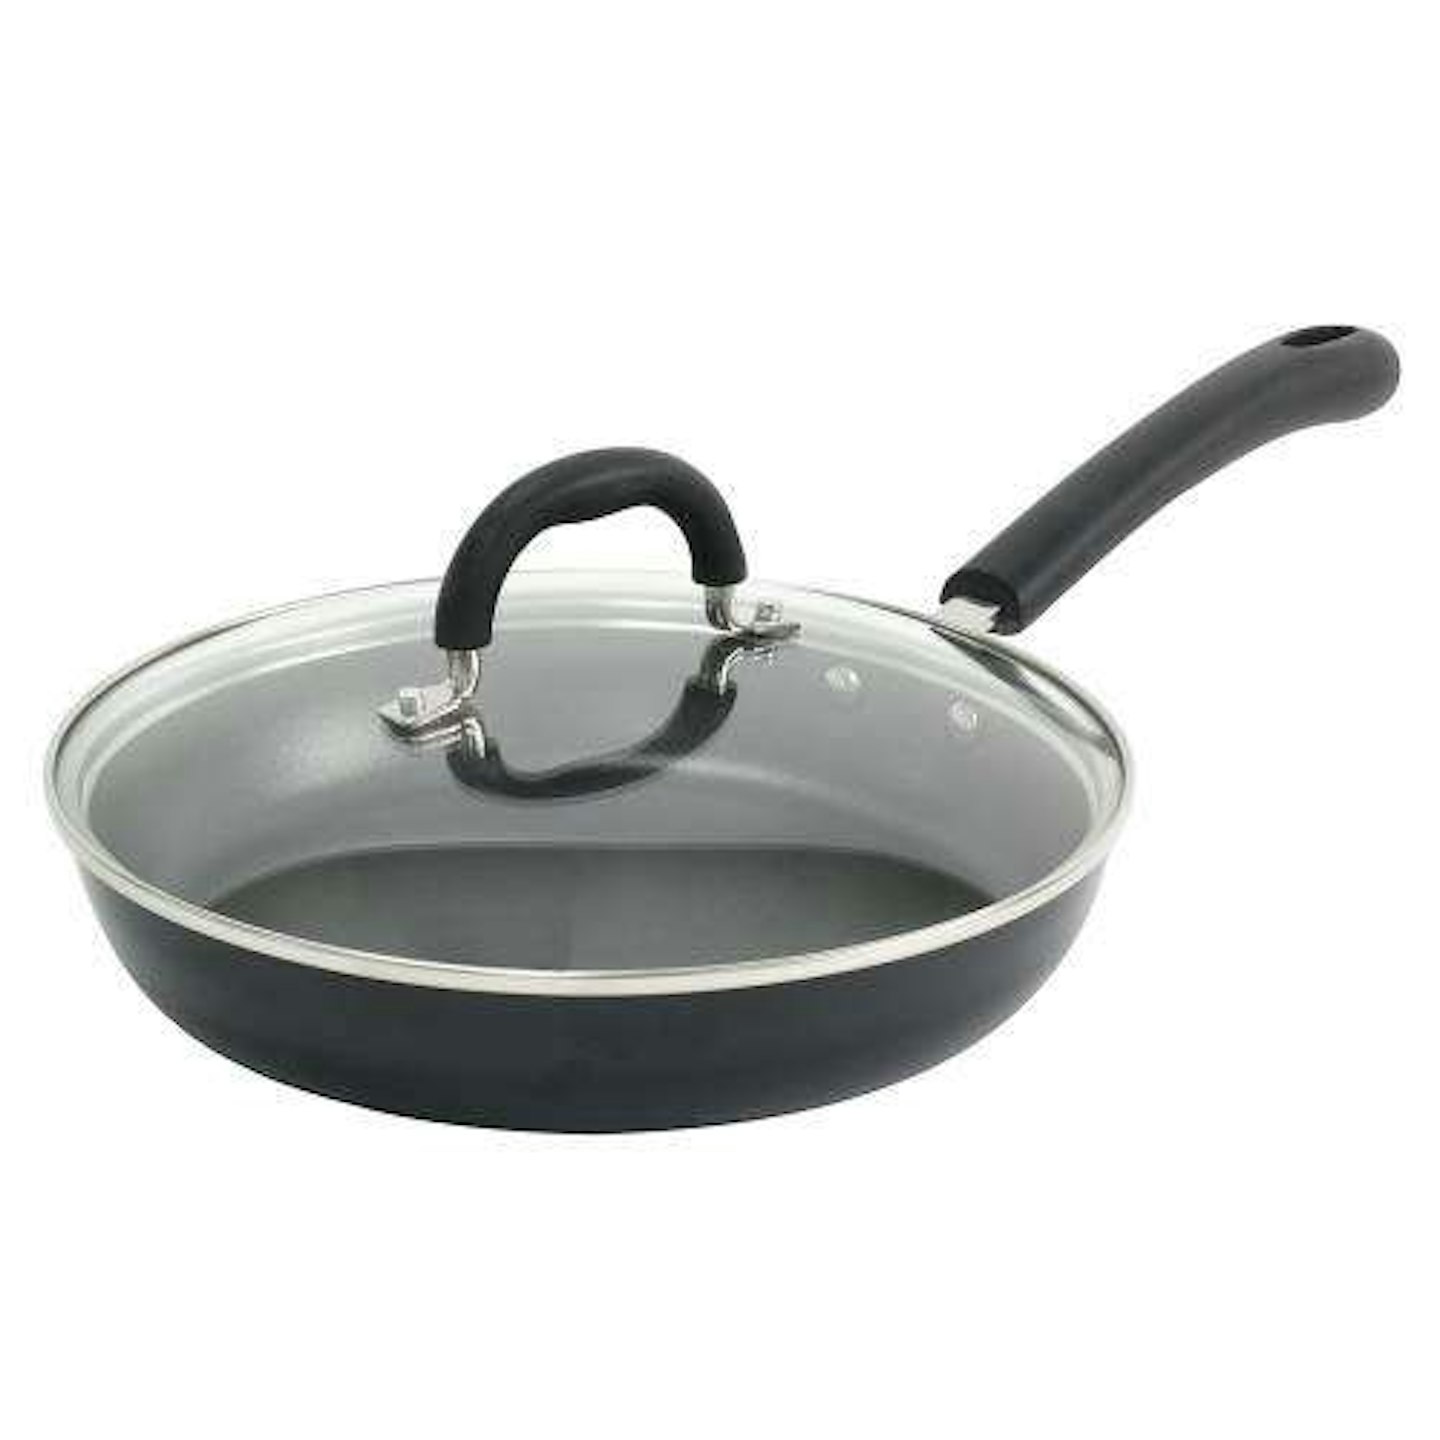 Procook Gourmet Non-Stick Frying Pan with Lid